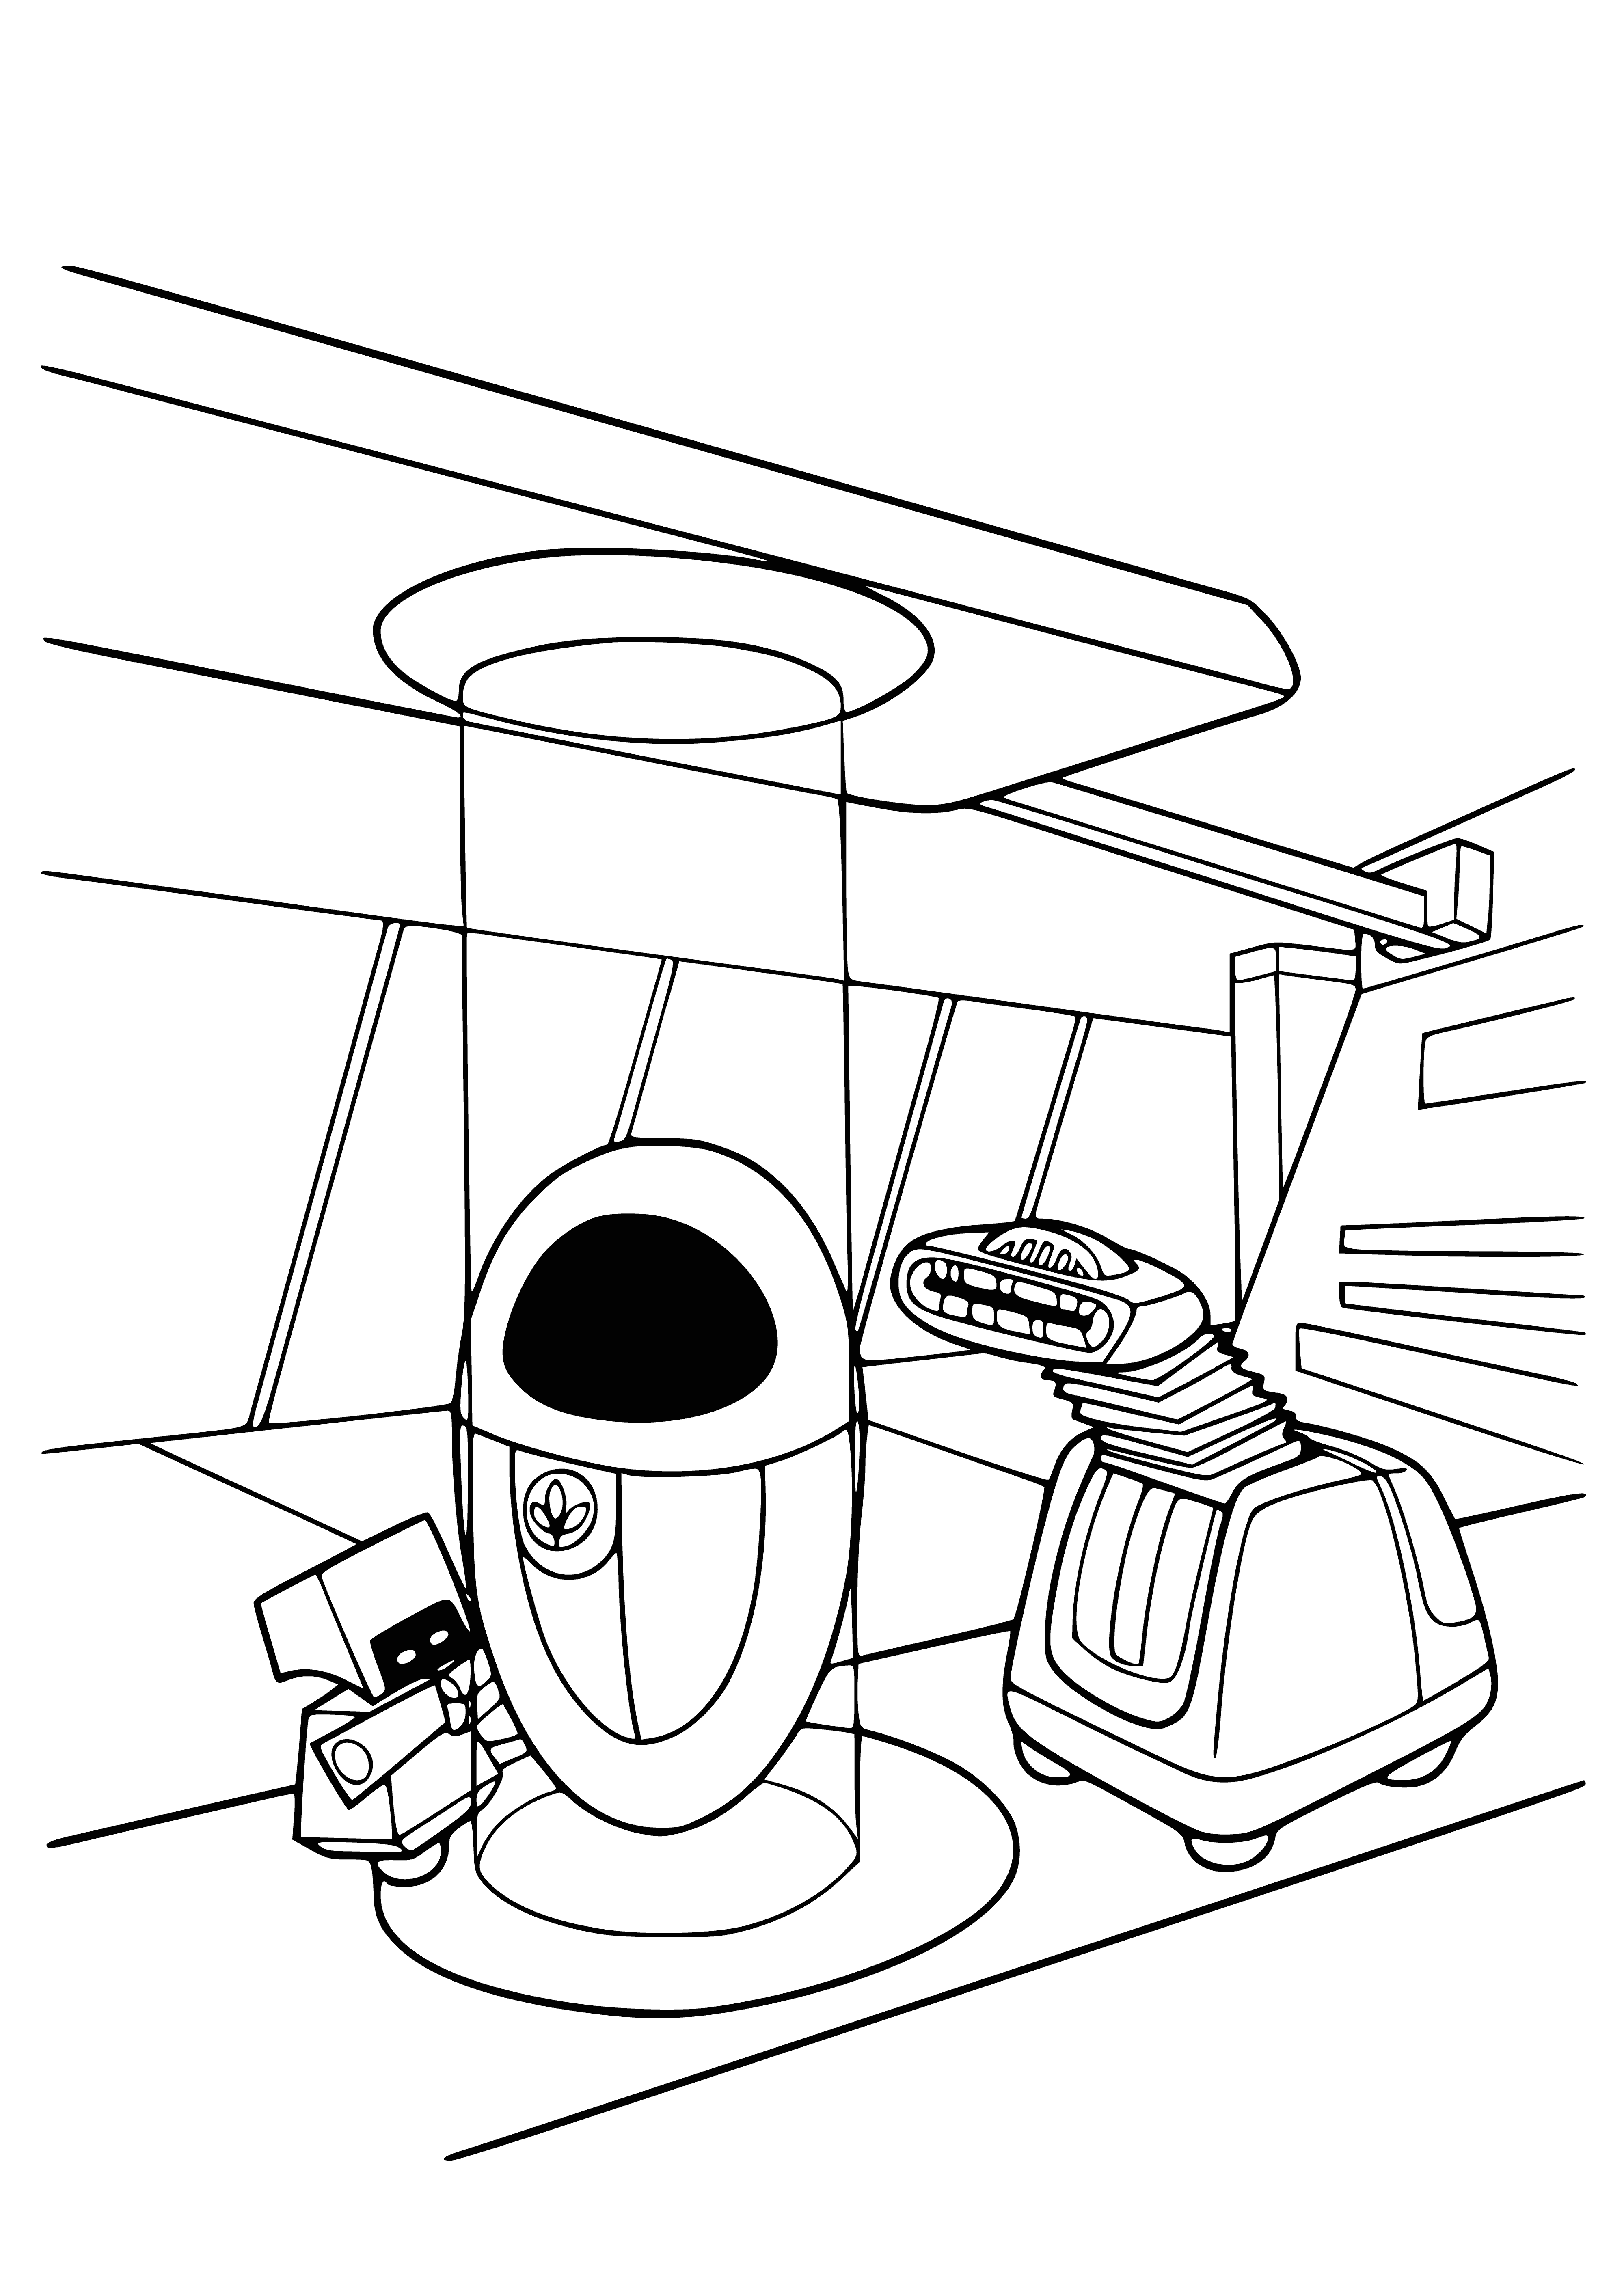 coloring page: Two robots, Wall-E & Eve, in love! Wall-E looks like trash can and Eve looks like computer monitor on legs. So cute! #RobotsInLove